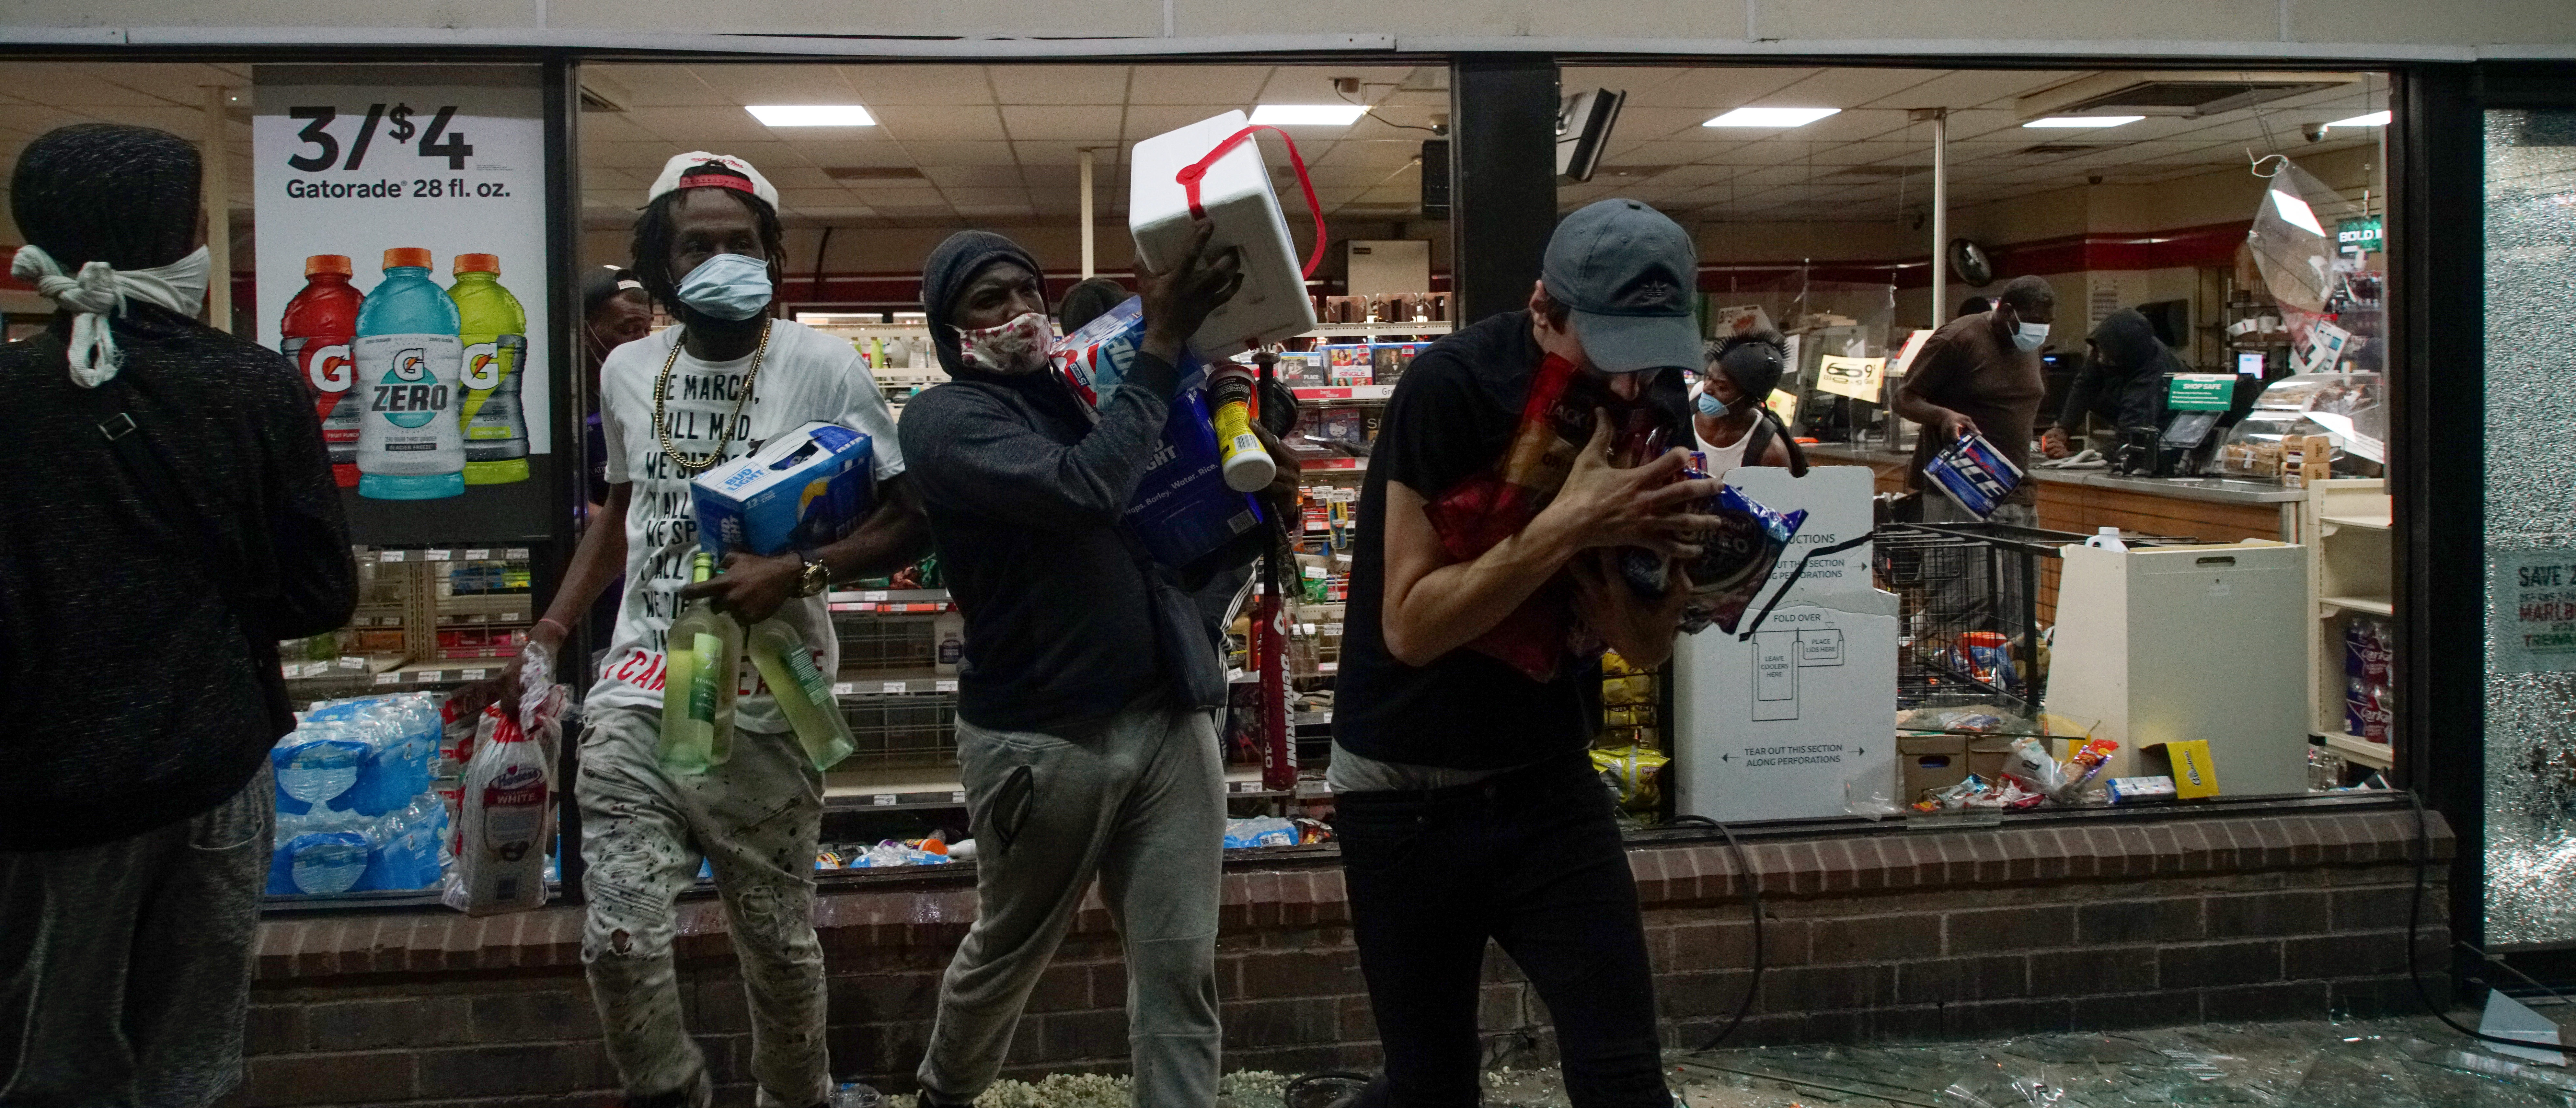 Looters come out a broken window of a 7-11 during a protest against the death in Minneapolis police custody of African-American man George Floyd, in St Louis, Missouri, U.S., June 1, 2020. REUTERS/Lawrence Bryant